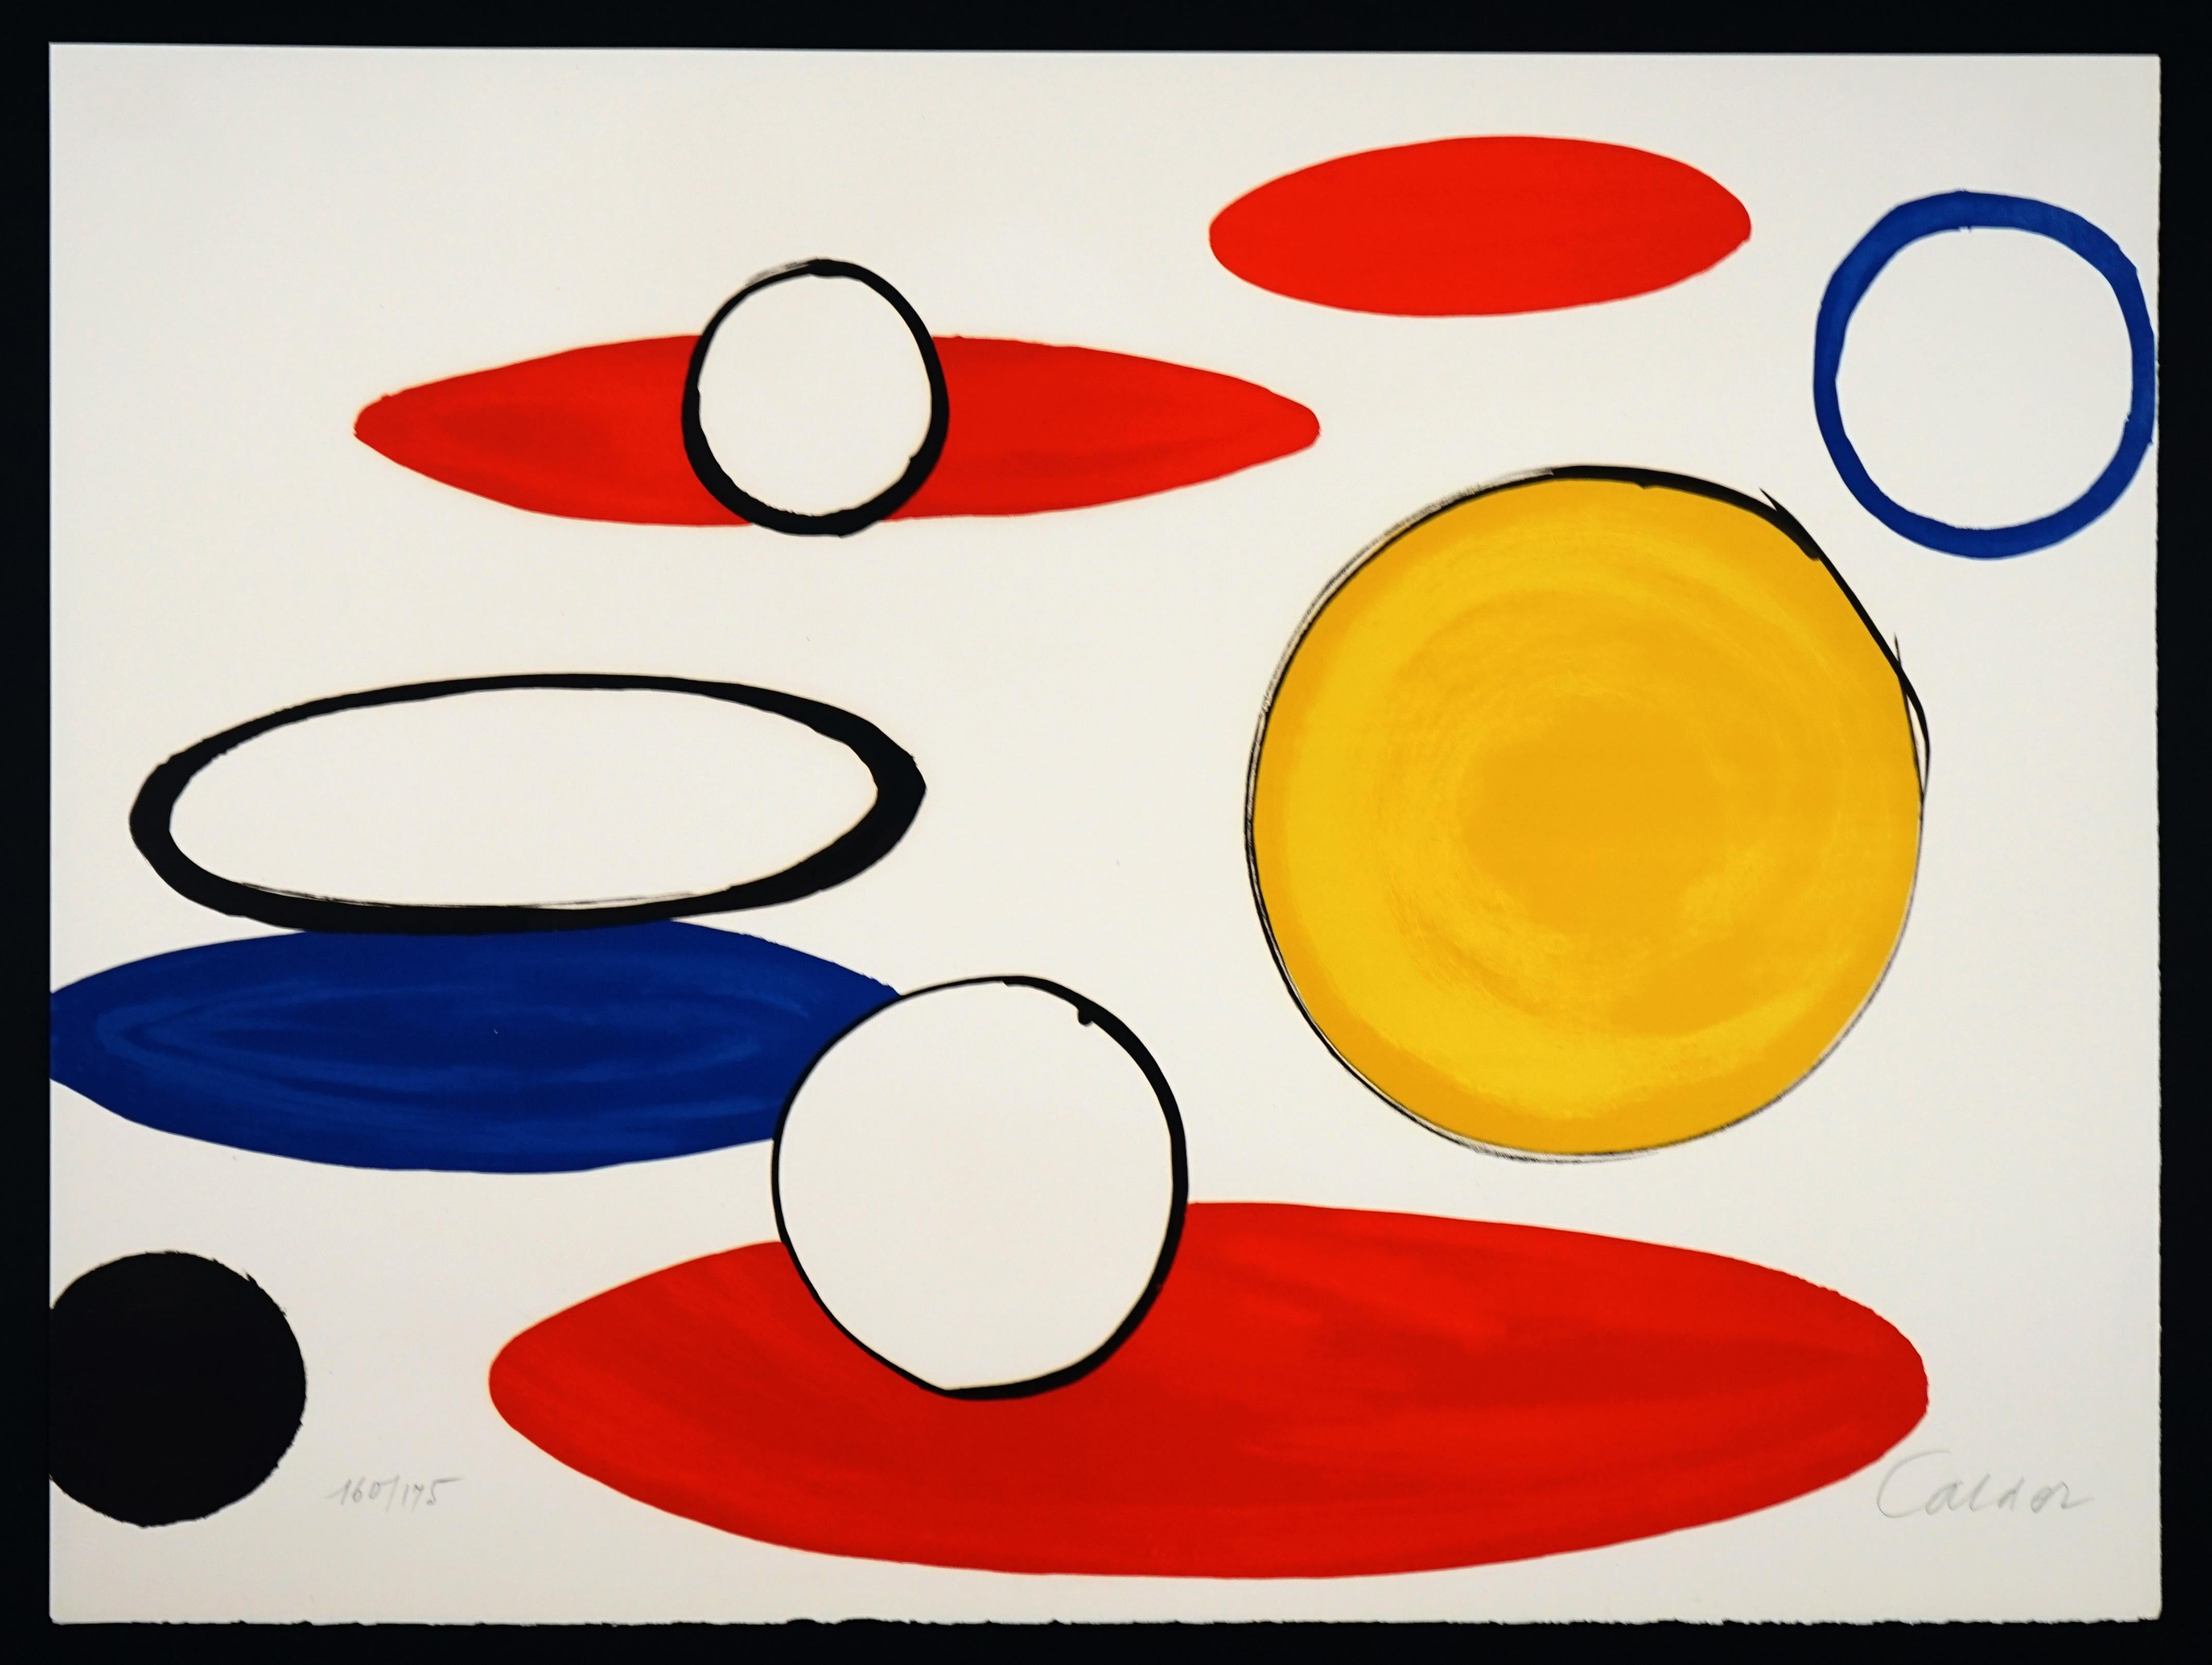 Alexander Calder Abstract Print - "Circles" from Our Unfinished Revolution